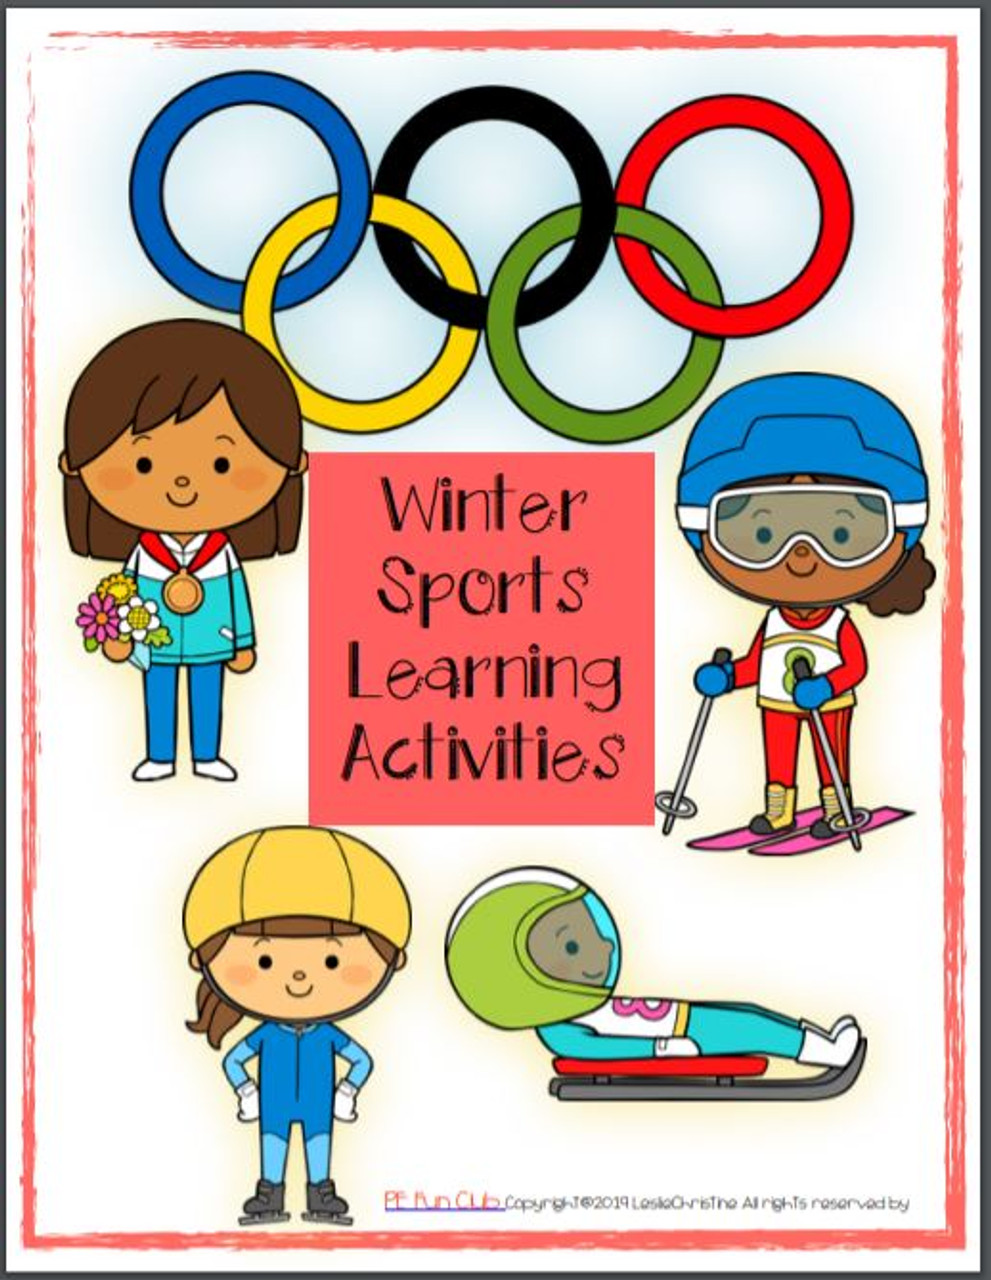 Winter Olympic Learning Activities for PE